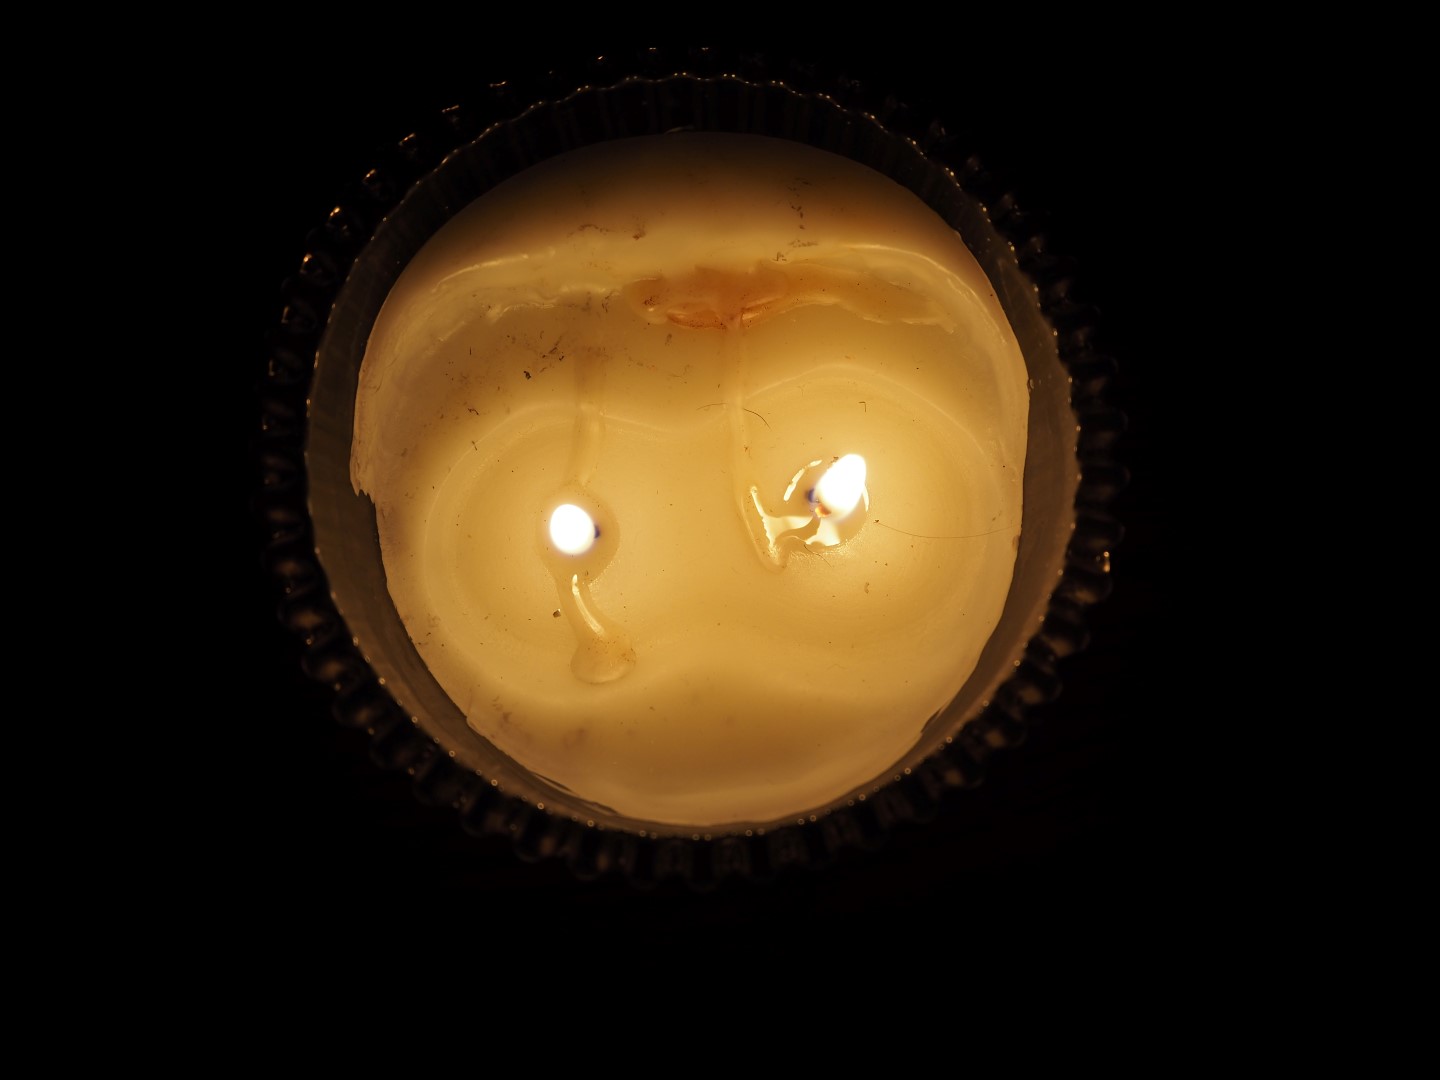 Technical Director: A candle for everyone who has lost someone.